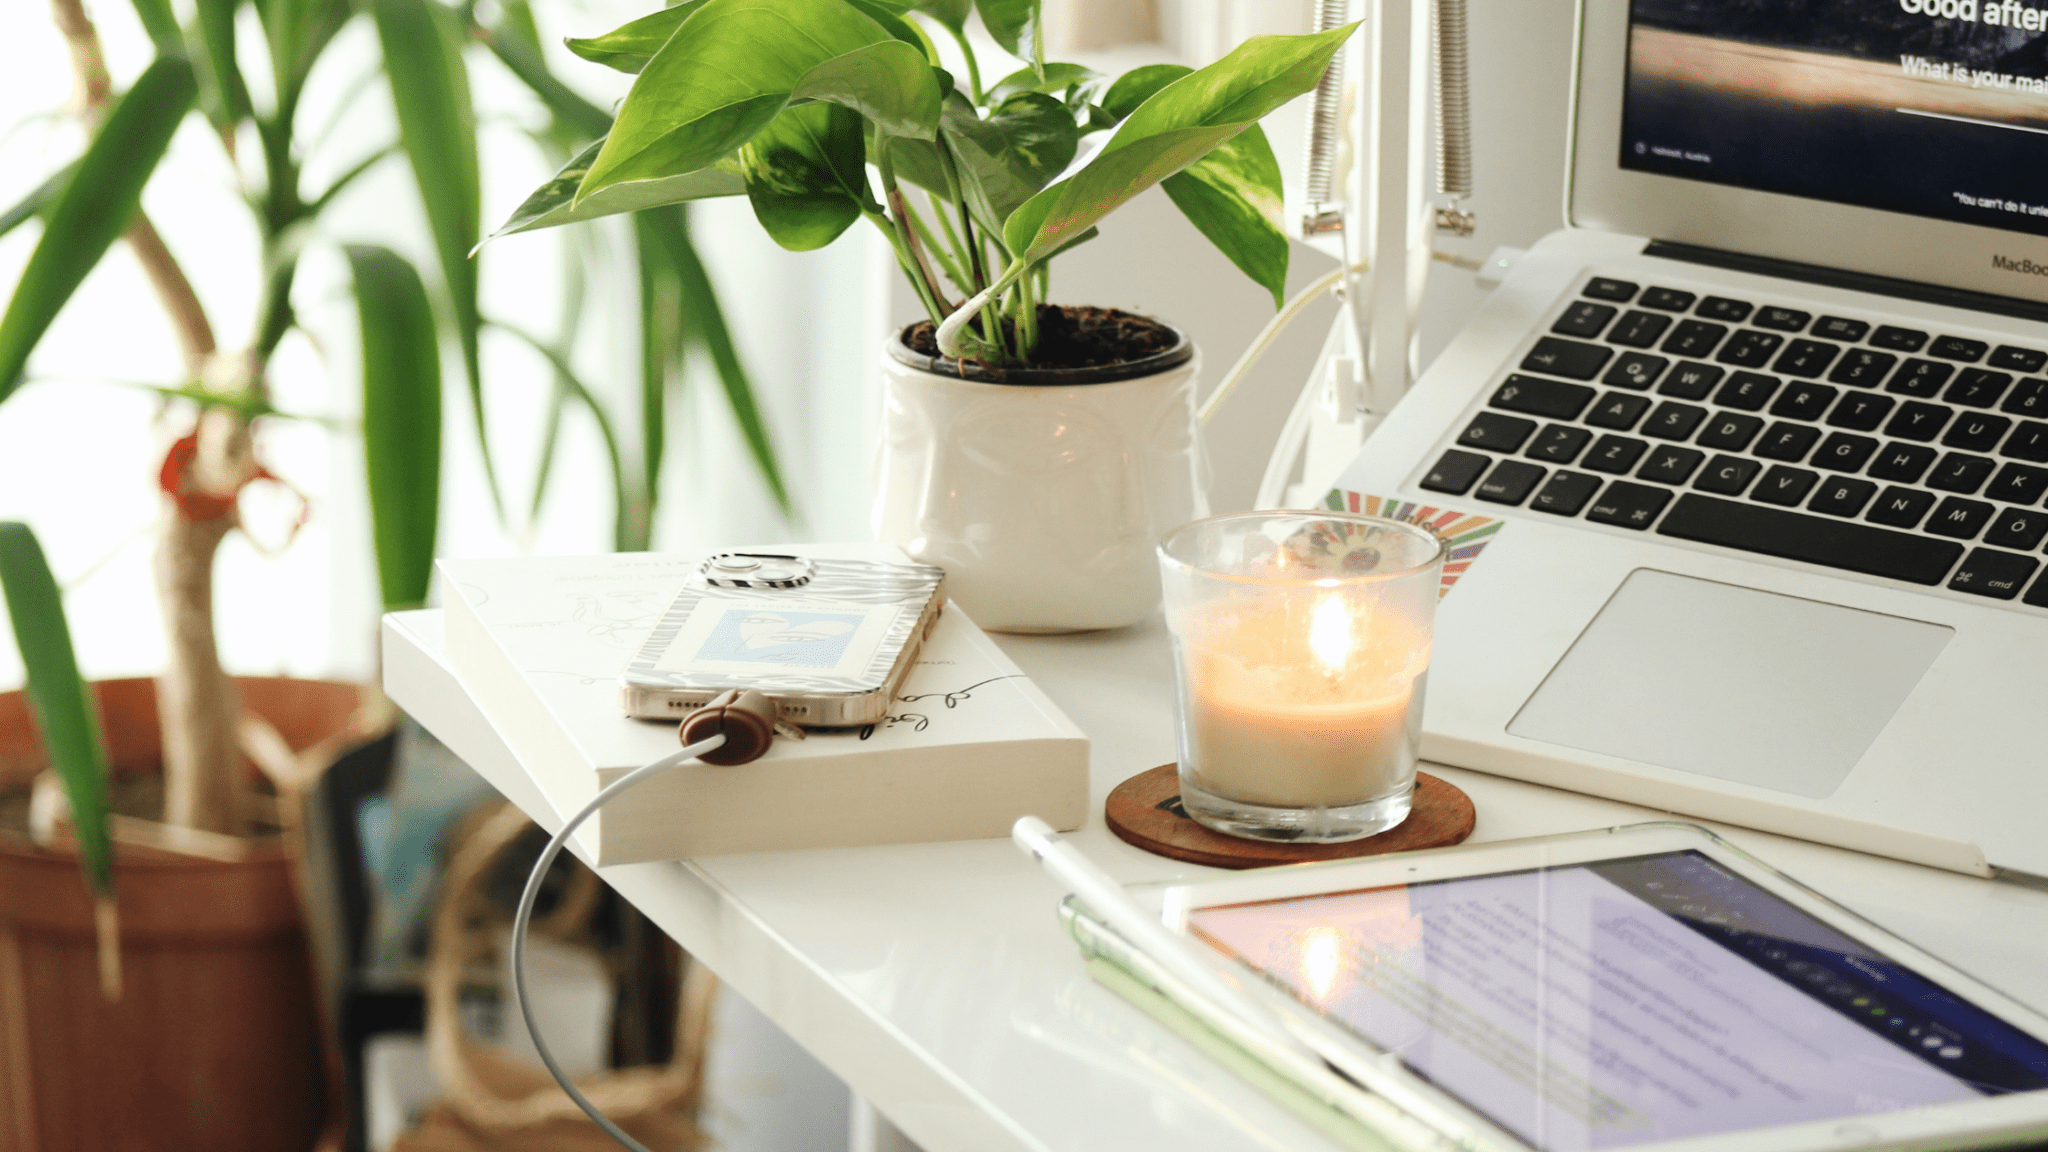 10 Easy Ways to Create an Eco-Friendly Home Office - Mondays in PJs